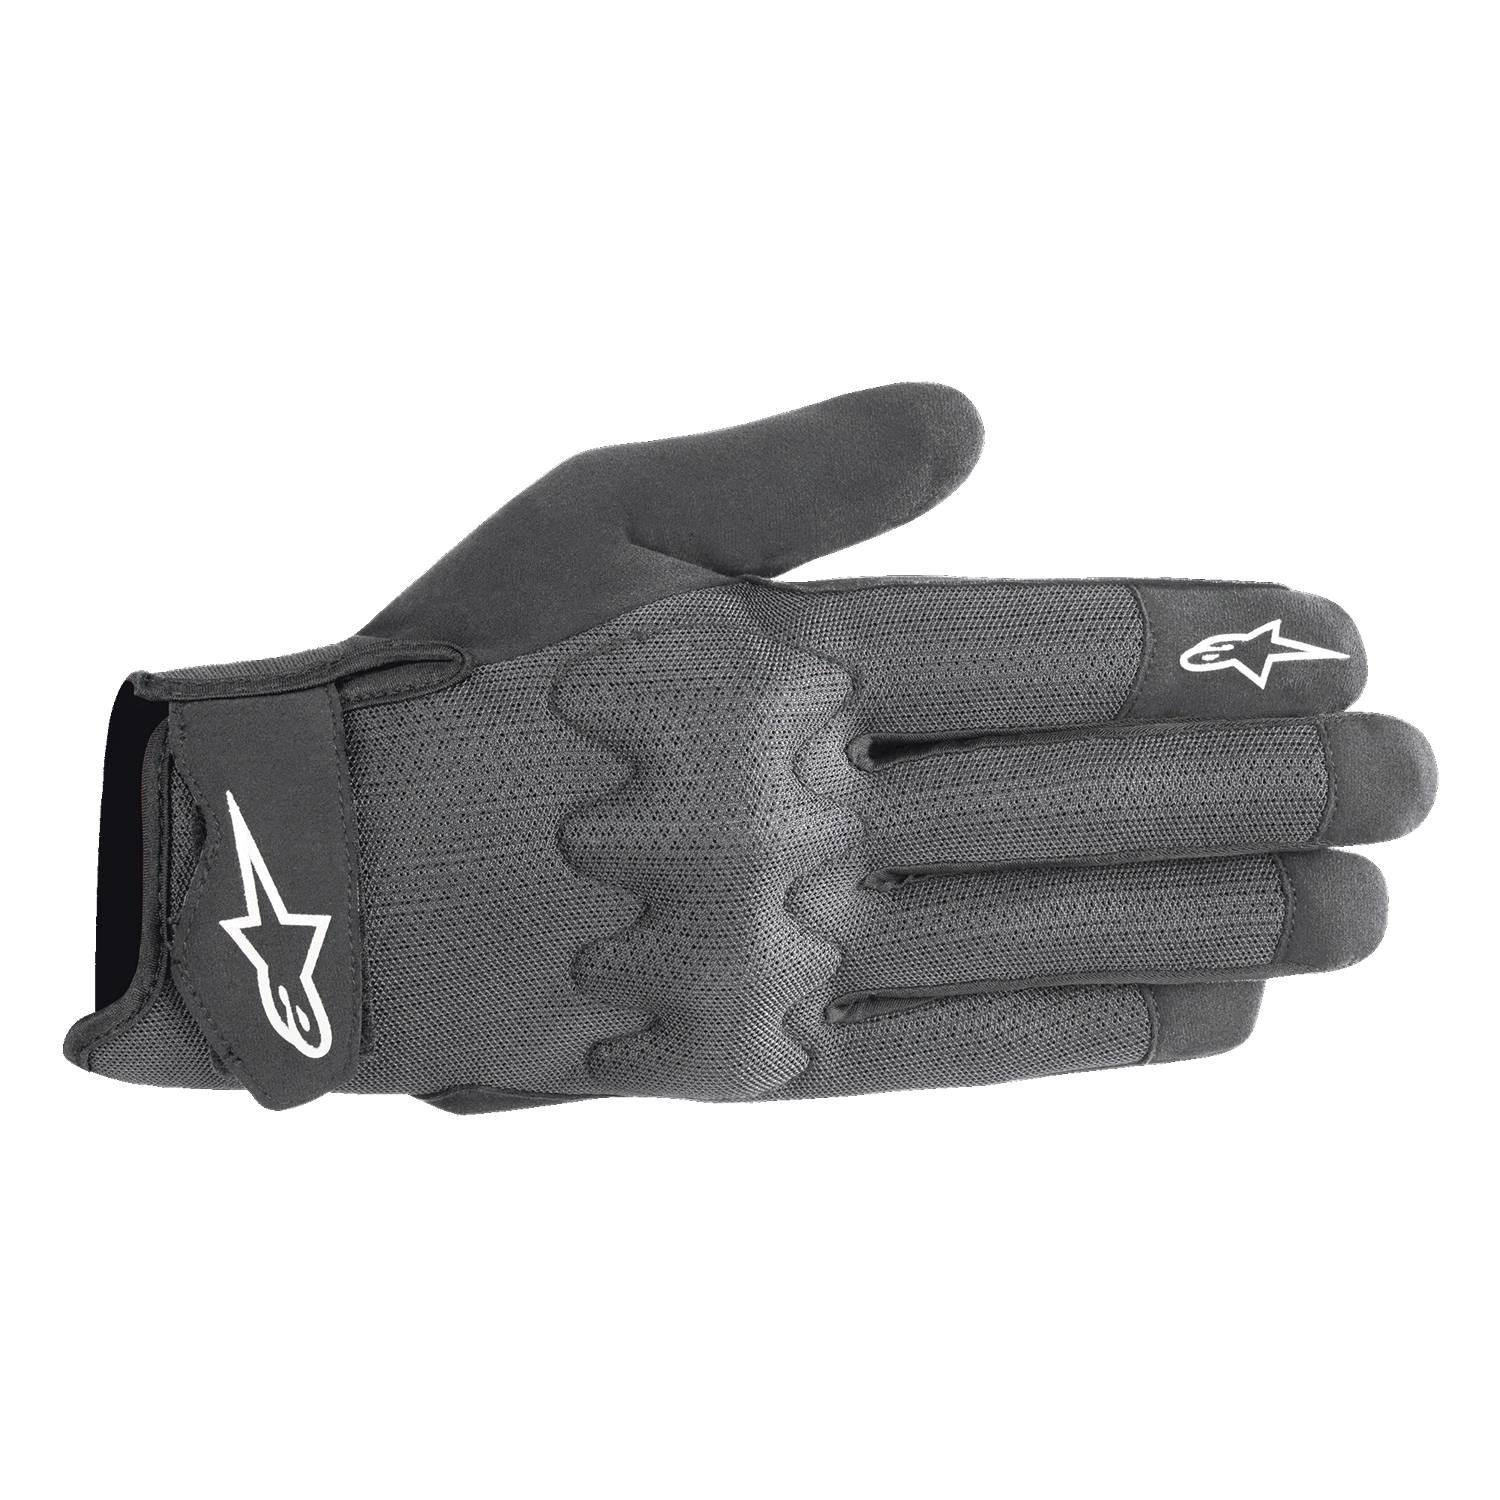 Image of Alpinestars Stated Air Gloves Black Silver Size M ID 8059347168654